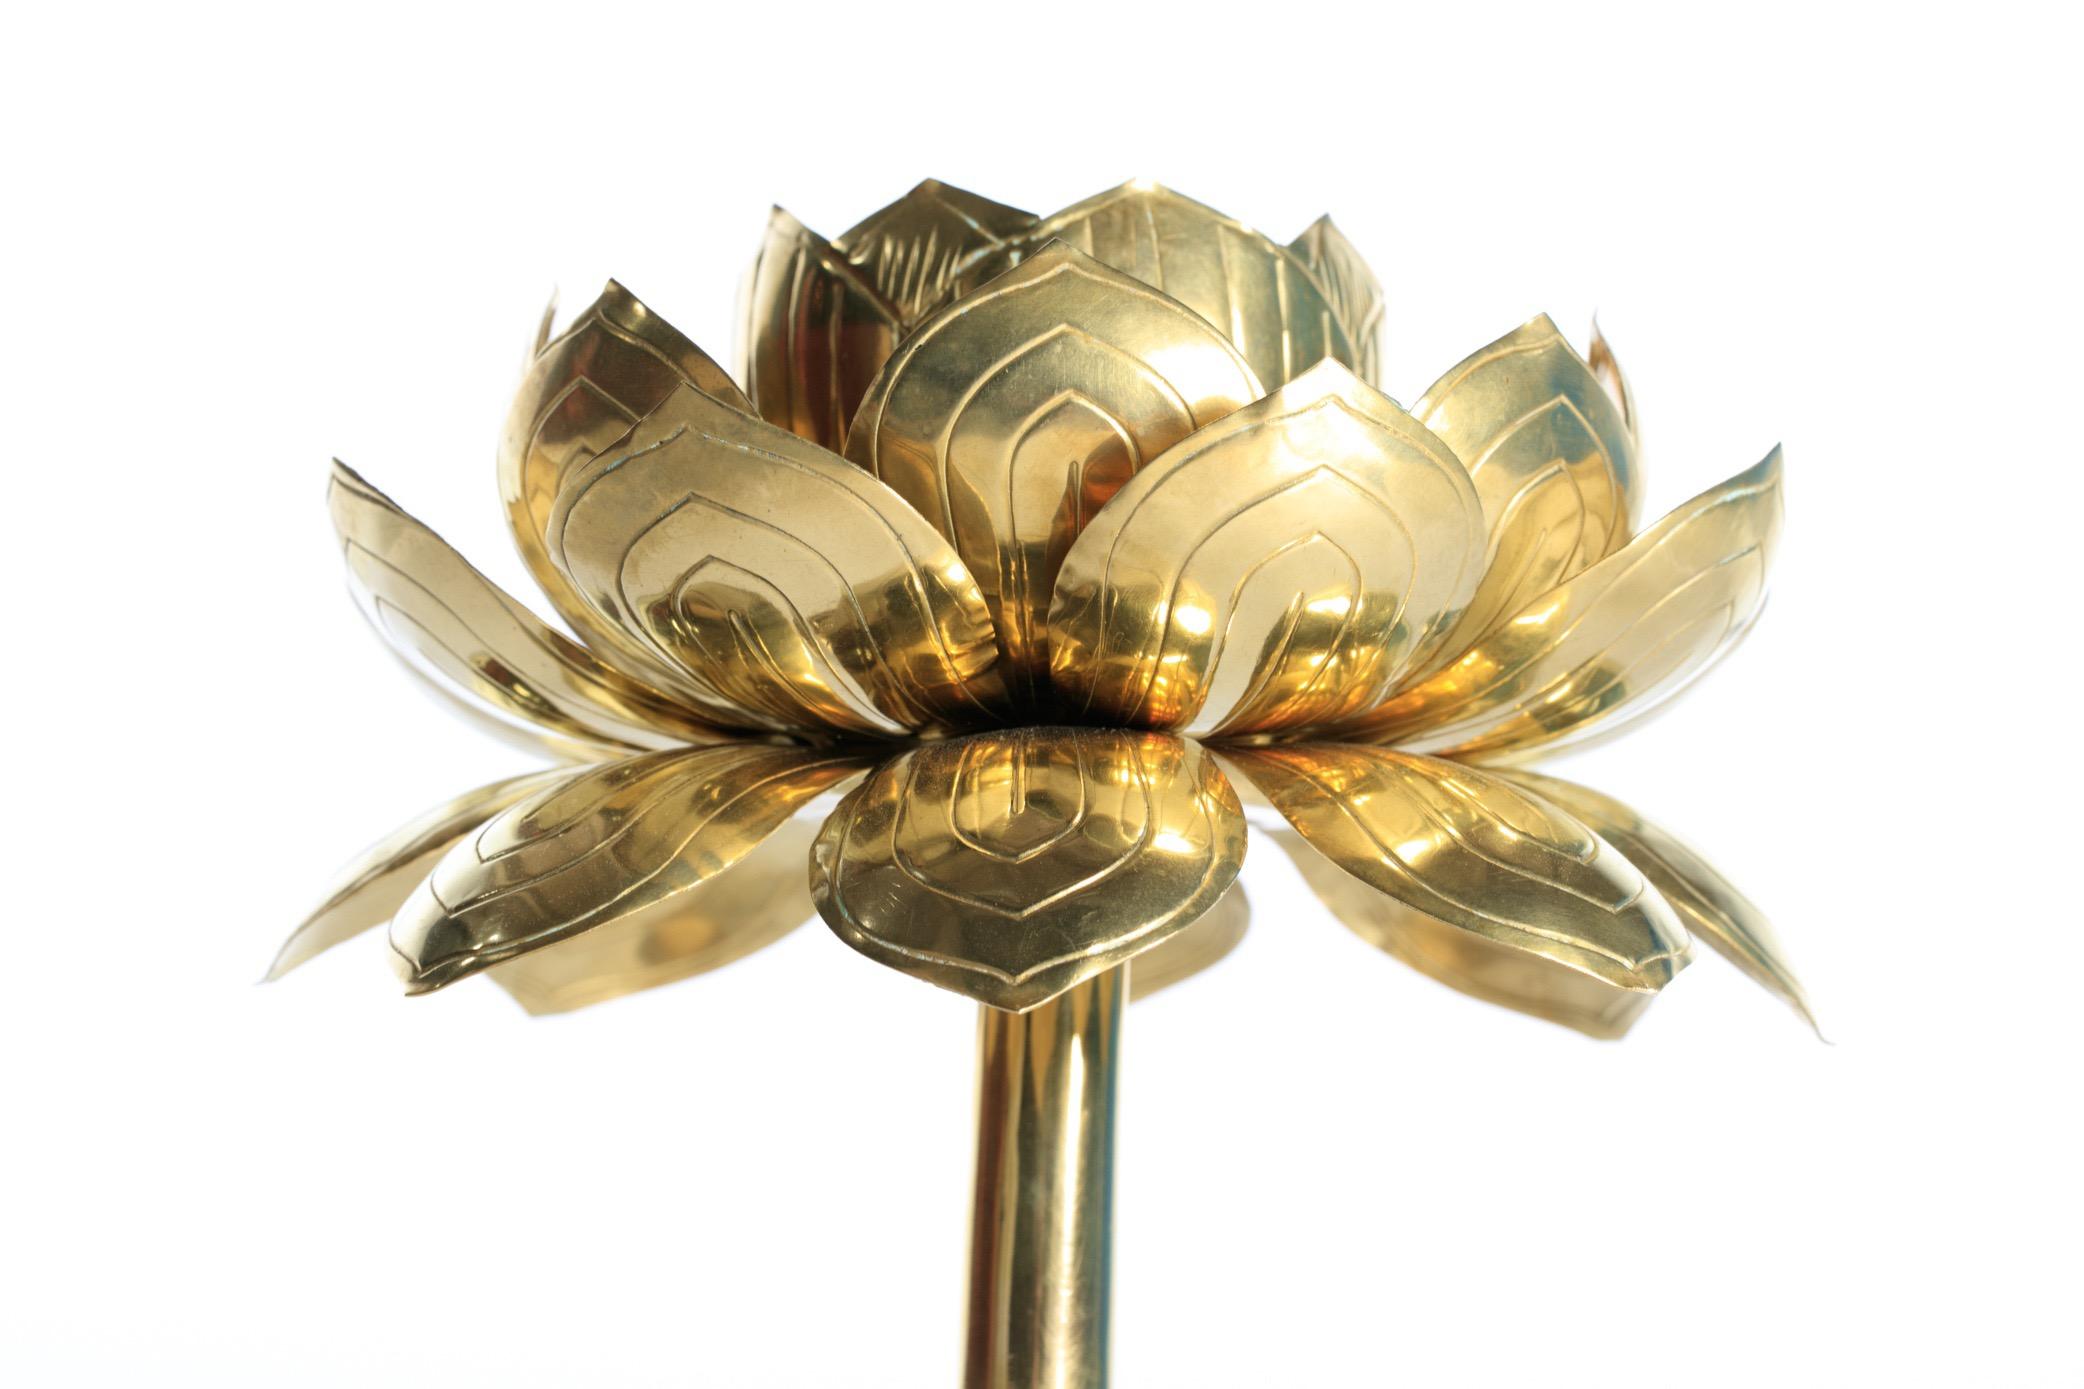 Exquisite and rare pair of delicate brass lotus flower, tall candle sticks by Feldman, circa 1960s. Beautifully polished and in the style of Parzinger, these candlesticks emit a beautiful glow and add ambiance and style to any dining table or